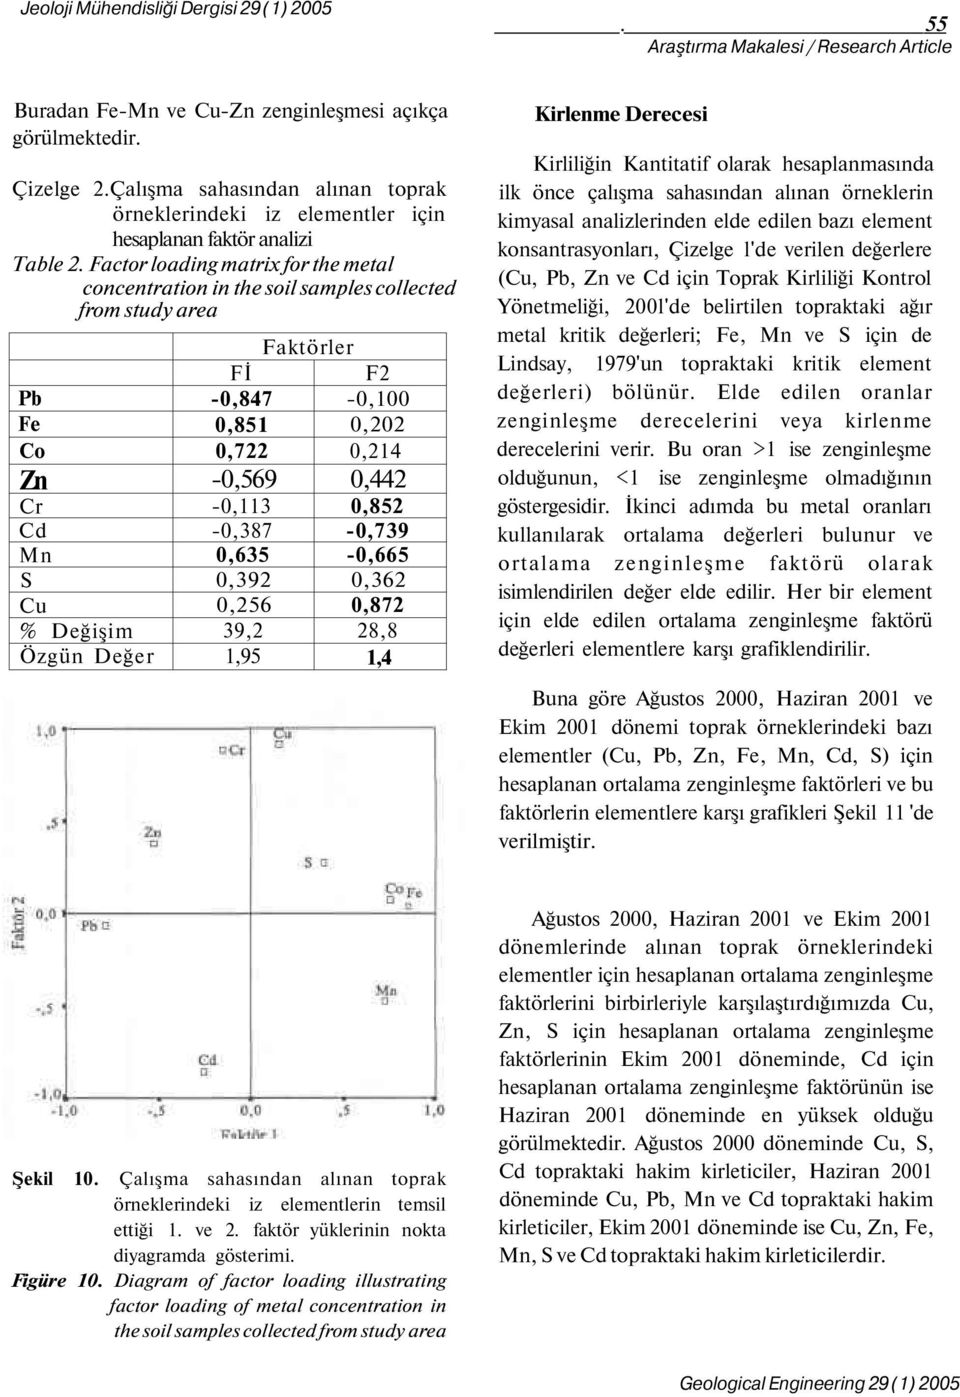 Factor loading matrix for the metal concentration in the soil samples collected from study area Faktörler Fİ F2 Pb -0,847-0,100 Fe 0,851 0,202 Co 0,722 0,214 Zn -0,569 0,442 Cr -0,113 0,852 Cd